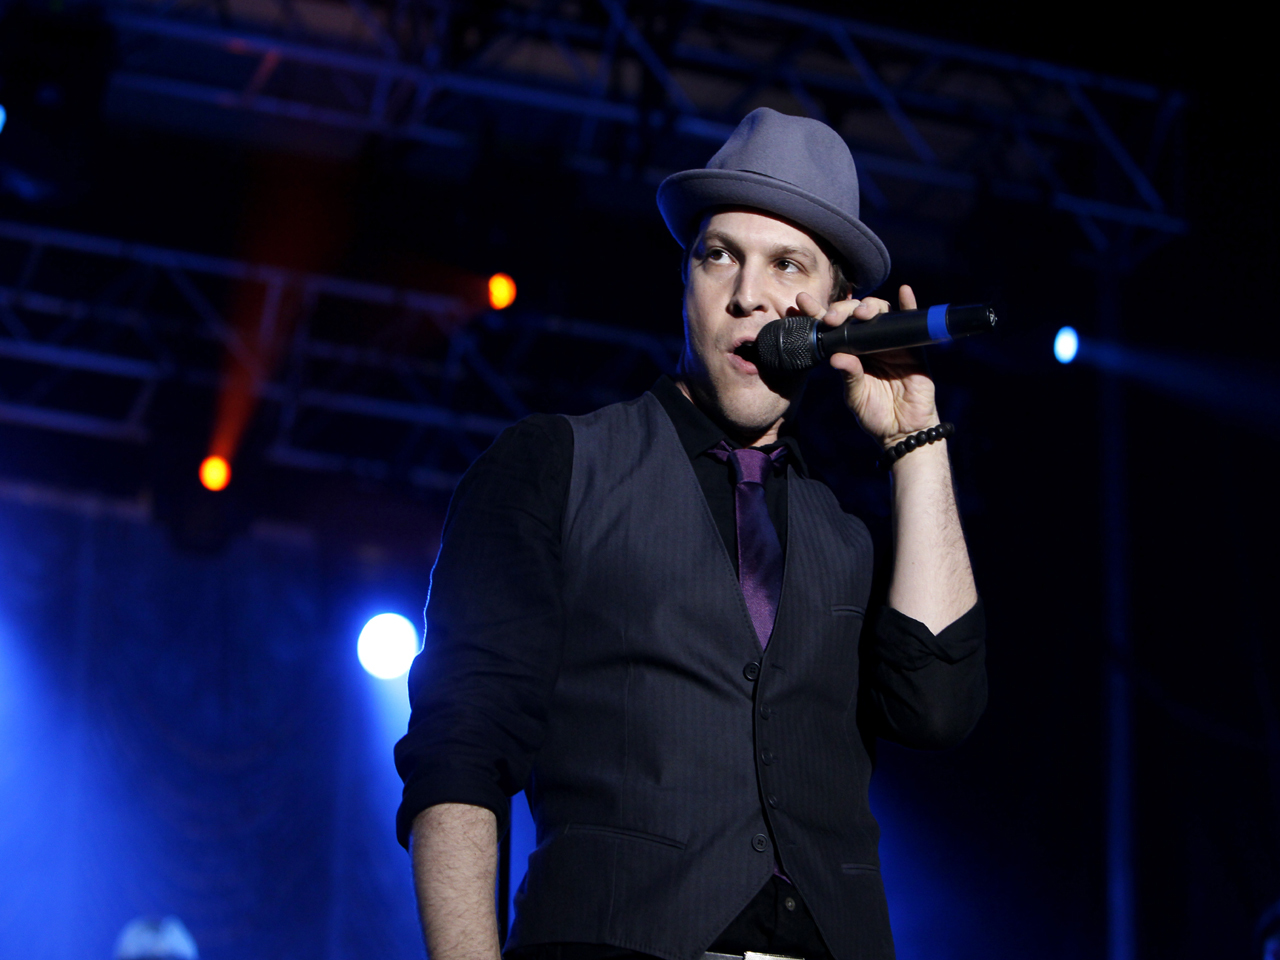 Gavin DeGraw to tour following "Dancing With the Stars" elimination